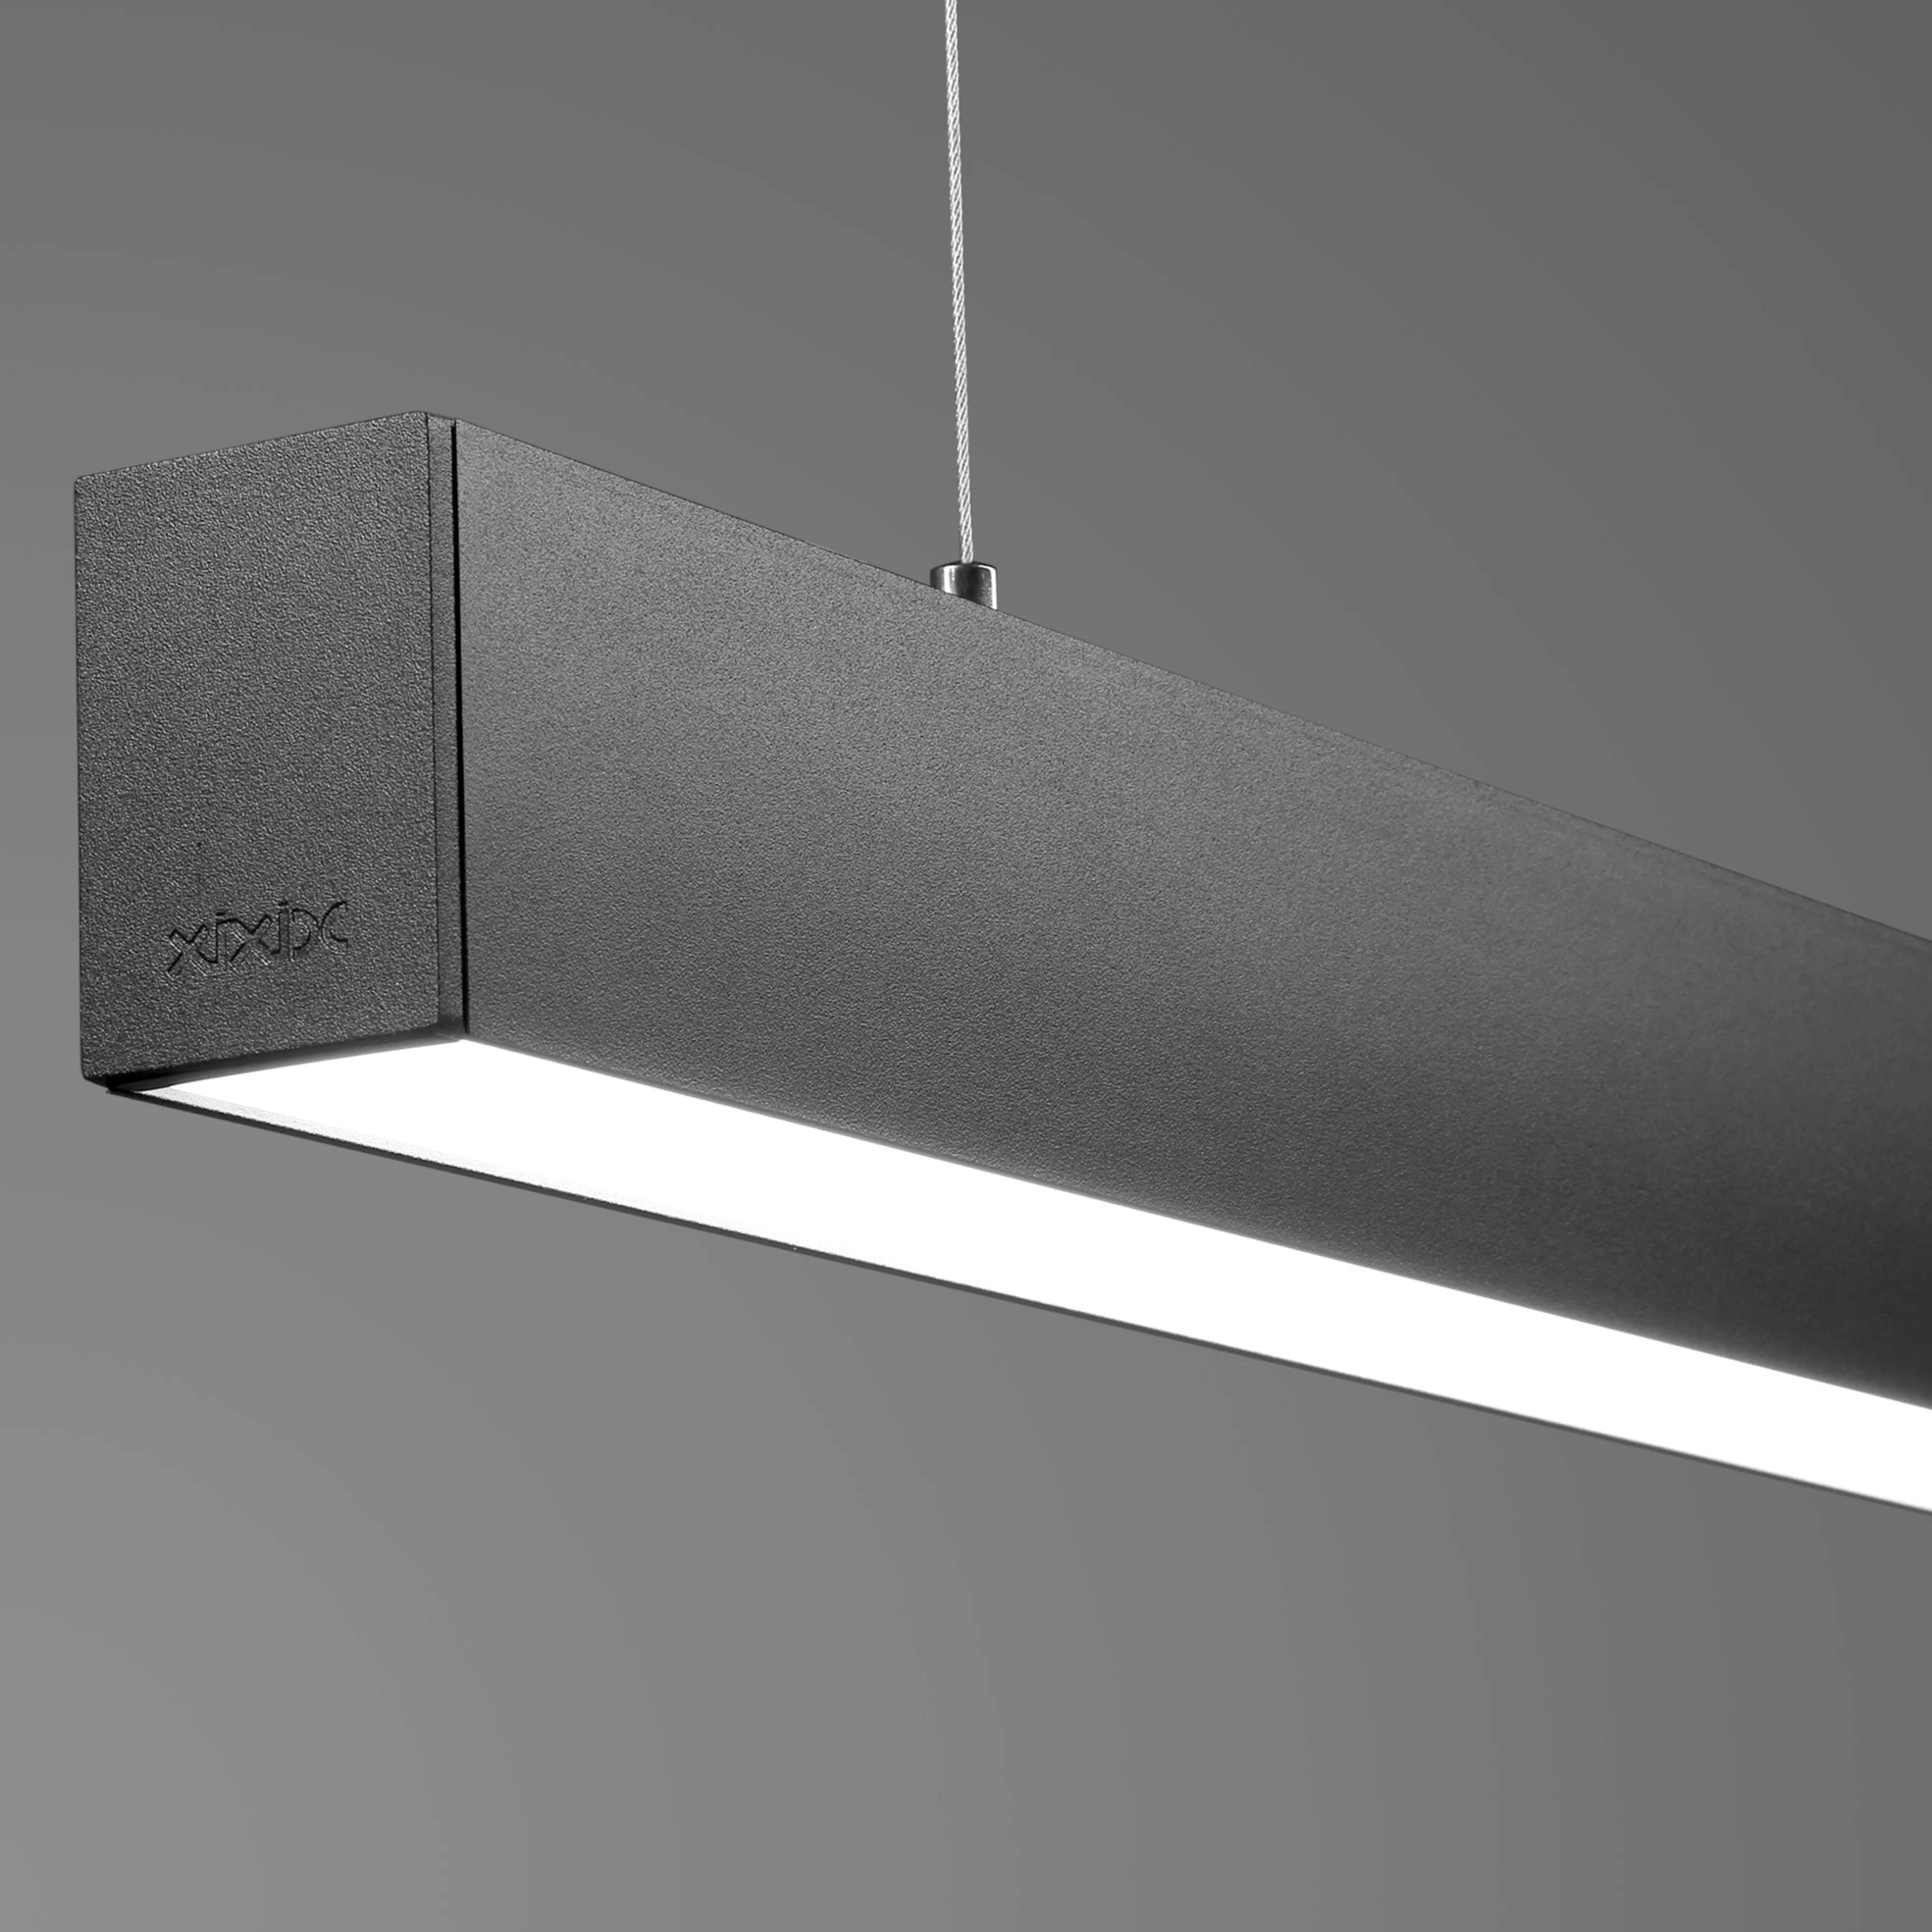 FD30-120LD freedom connect IP20 indoor linear lighting